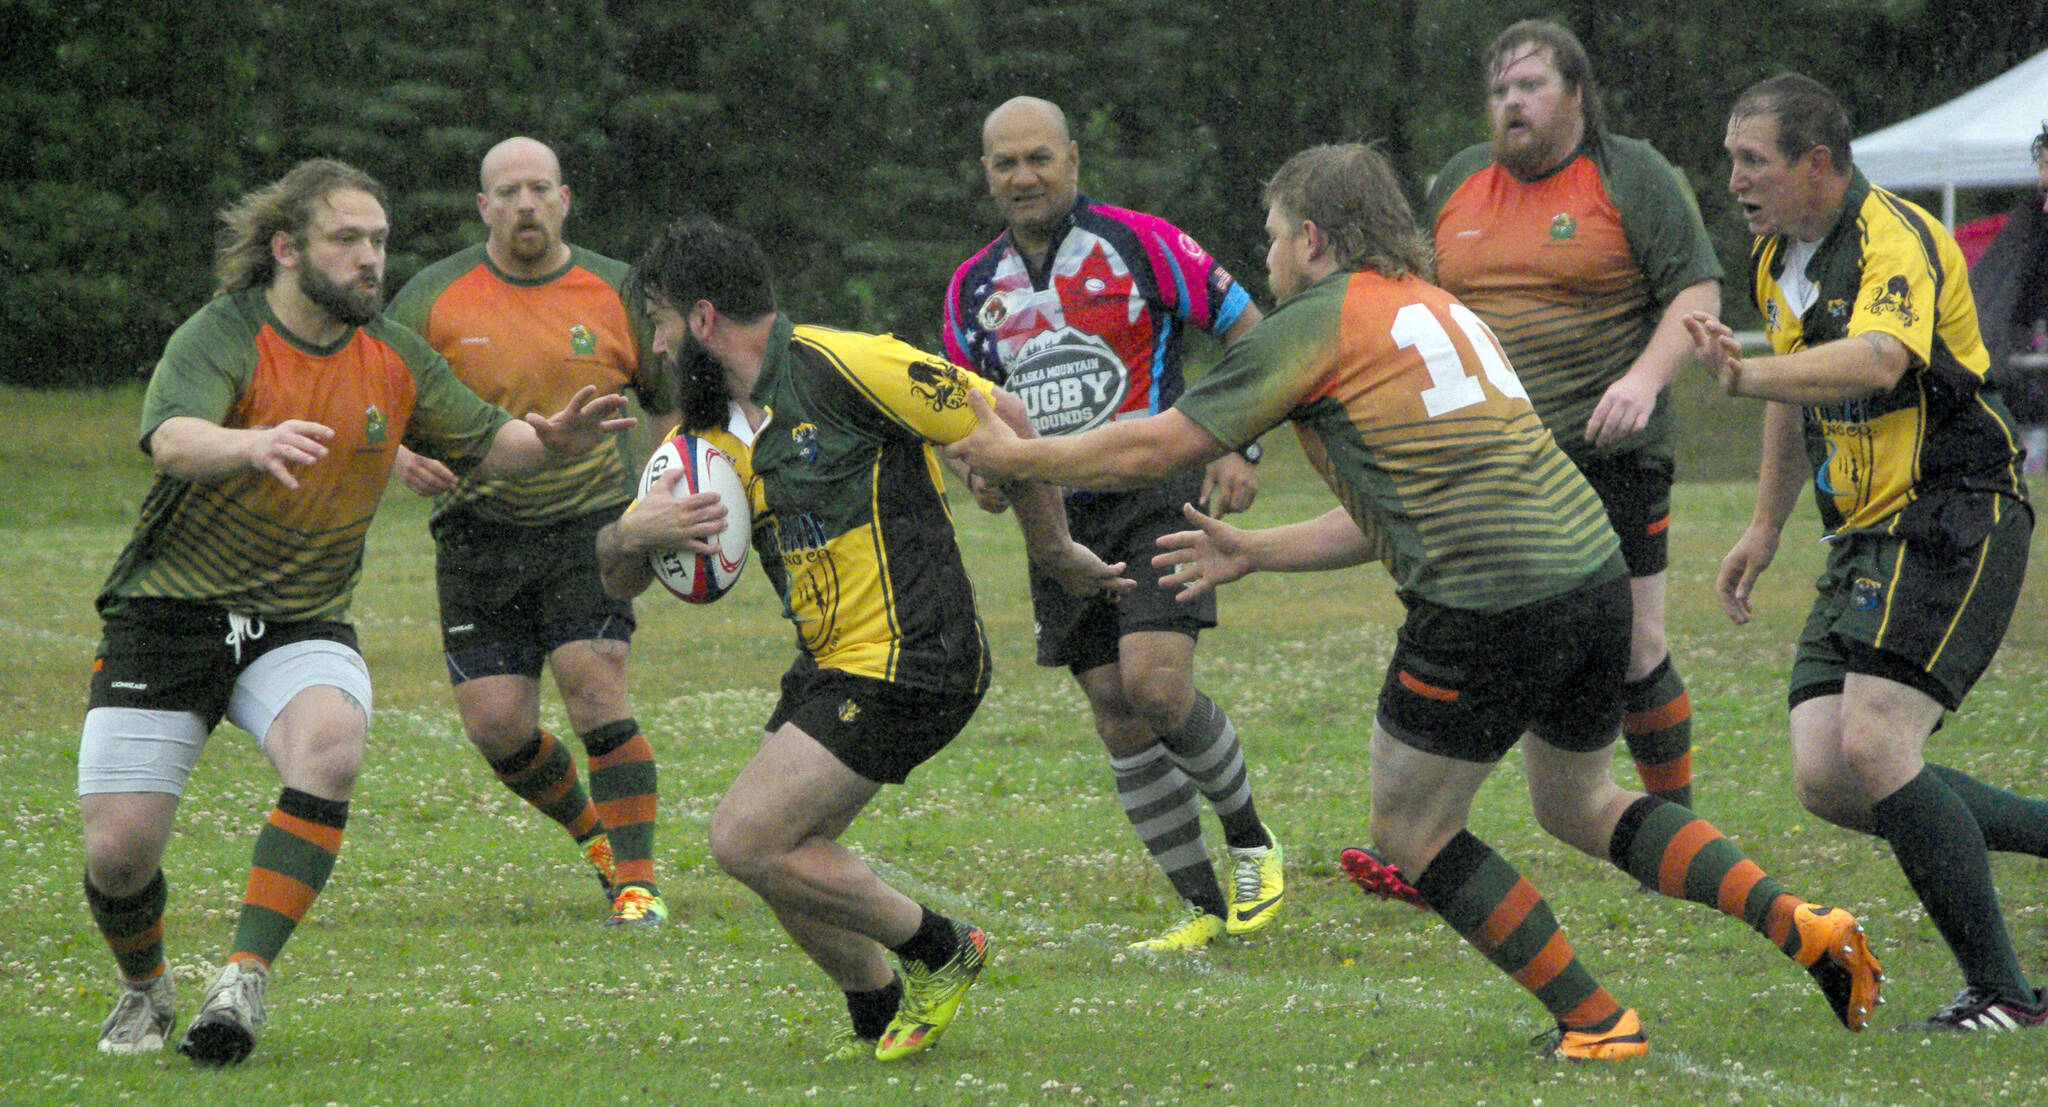 Ryan Childers of the Kenai River Wolfpack tries to evade Hermit CRABS players Sam “Sue” Warner (front) and Steven Ganley on Saturday, July 16, 2022, at the 2022 Kenai Dipnet Fest Rugby Tournament at Millennium Square in Kenai, Alaska. (Photo by Jeff Helminiak/Peninsula Clarion)